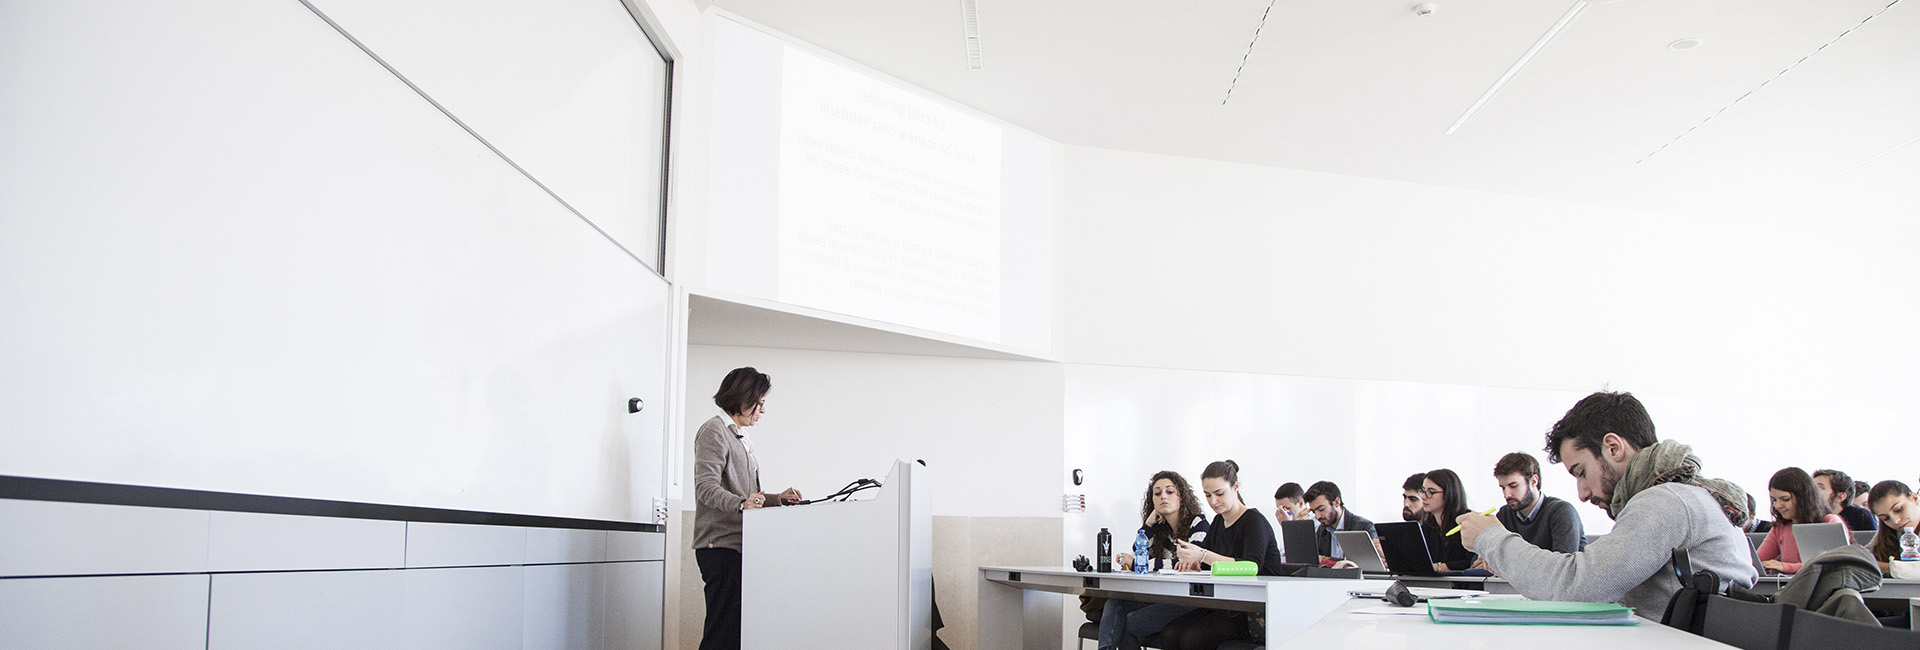 Activation of a research project at Bocconi Departments and Research centers